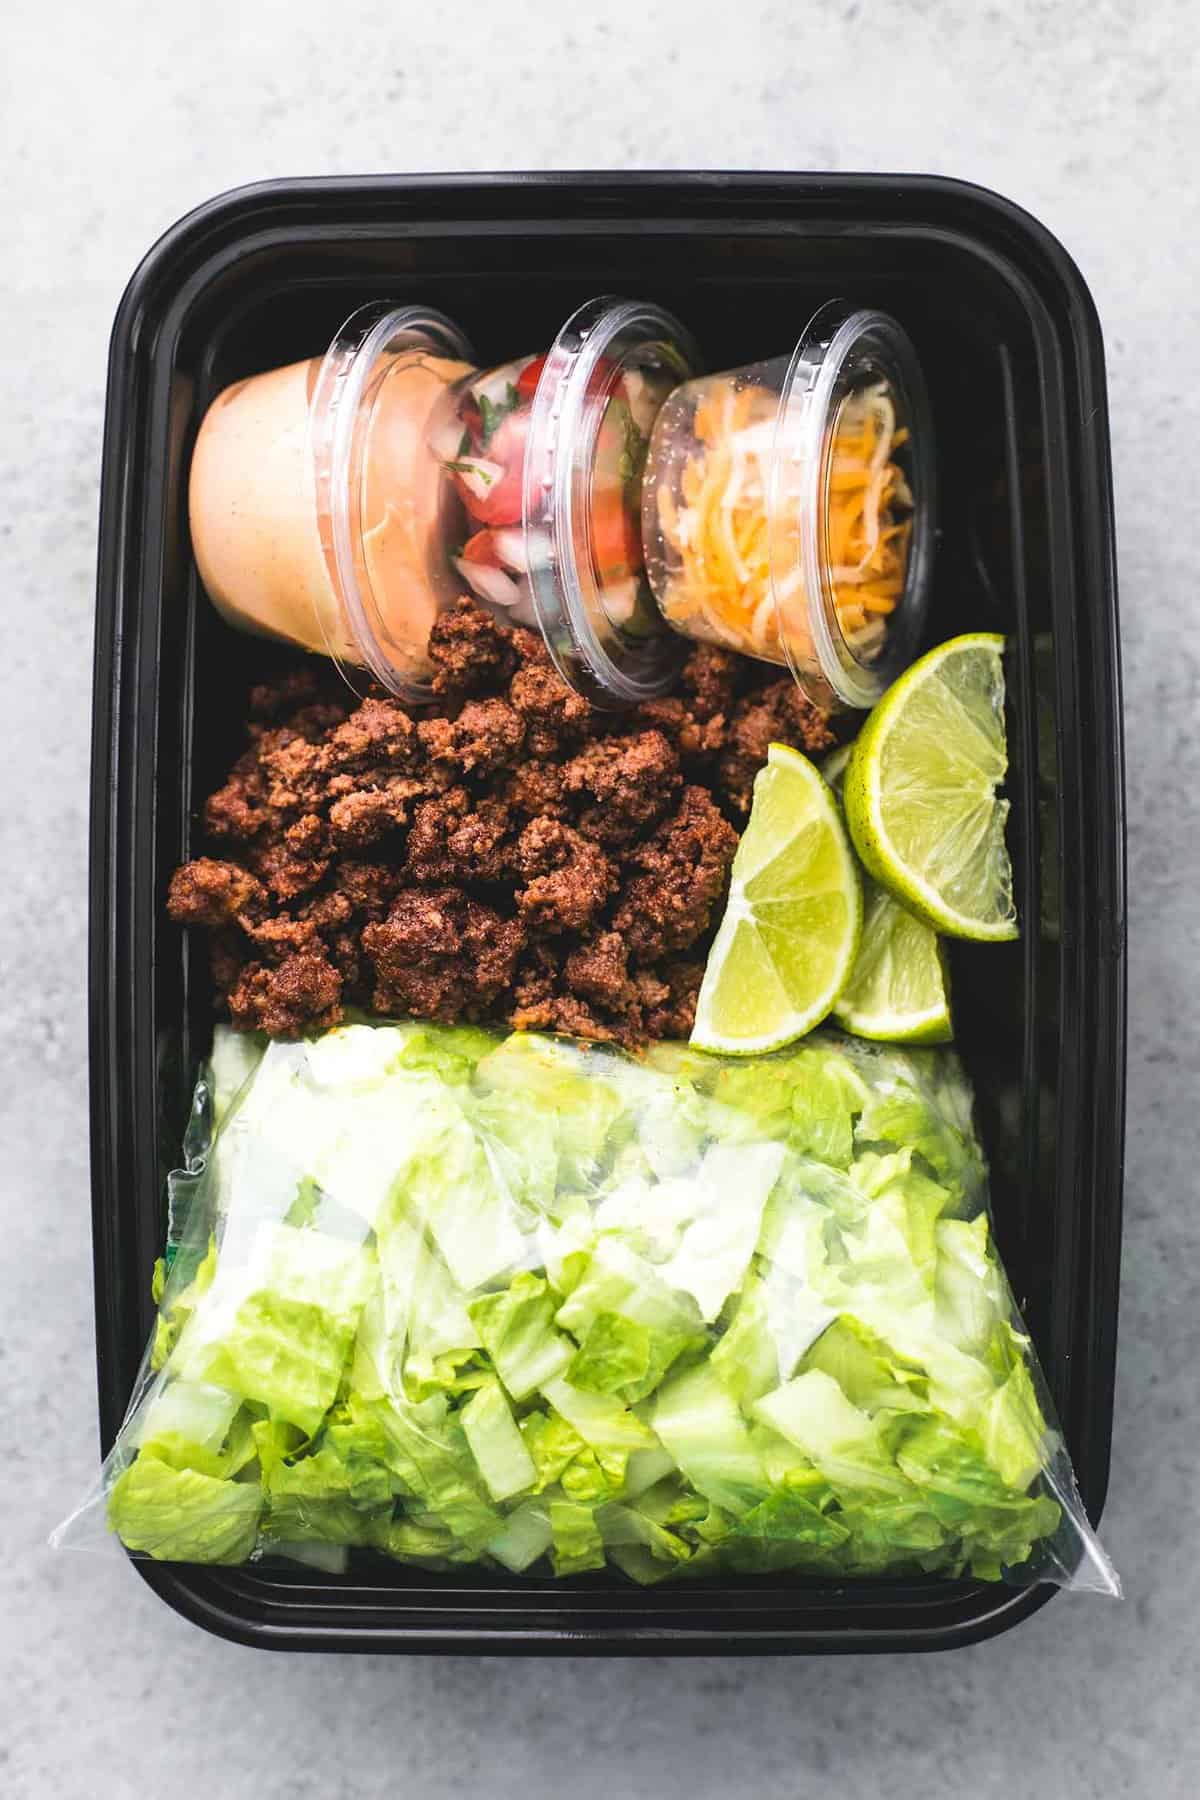 Taco Salad Meal Prep Bowls - Life In The Lofthouse